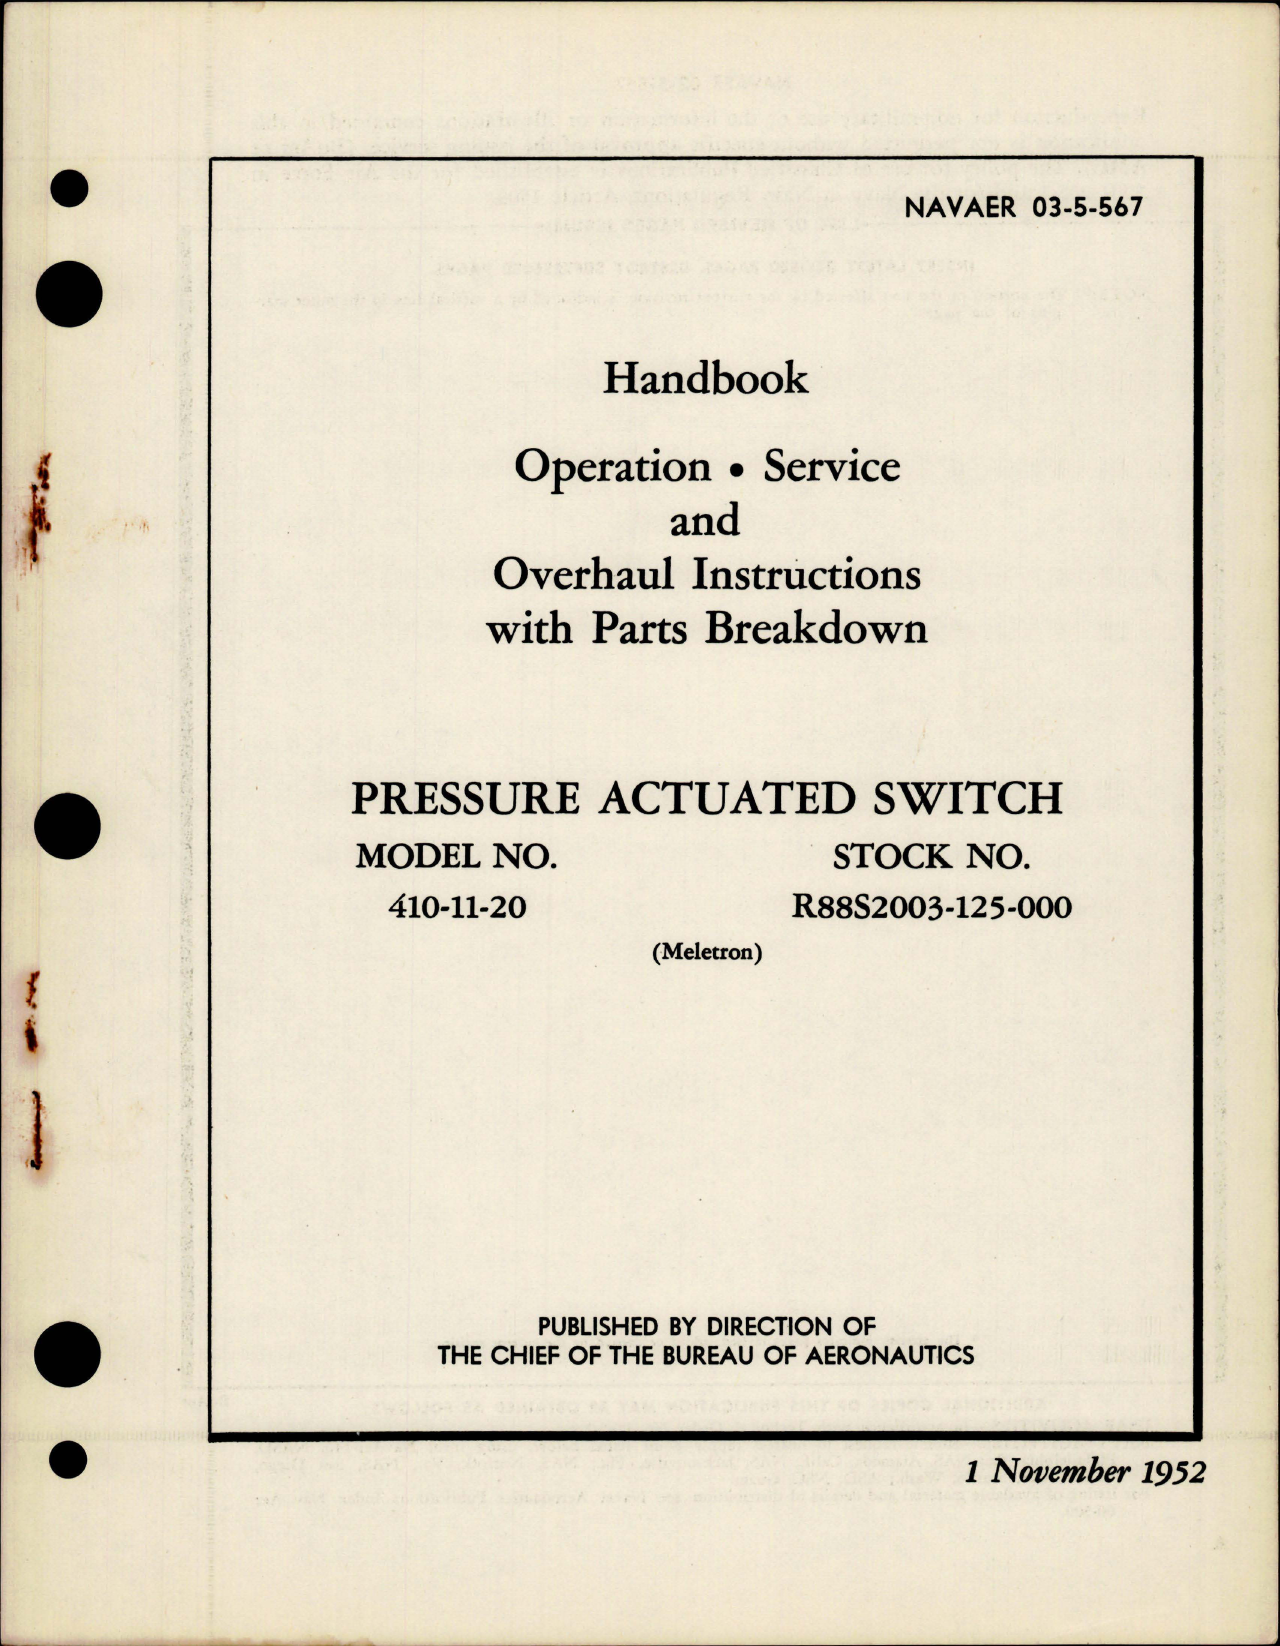 Sample page 1 from AirCorps Library document: Operation, Service, Overhaul, and Parts for Pressure Actuated Switch - Model 410-11-20 